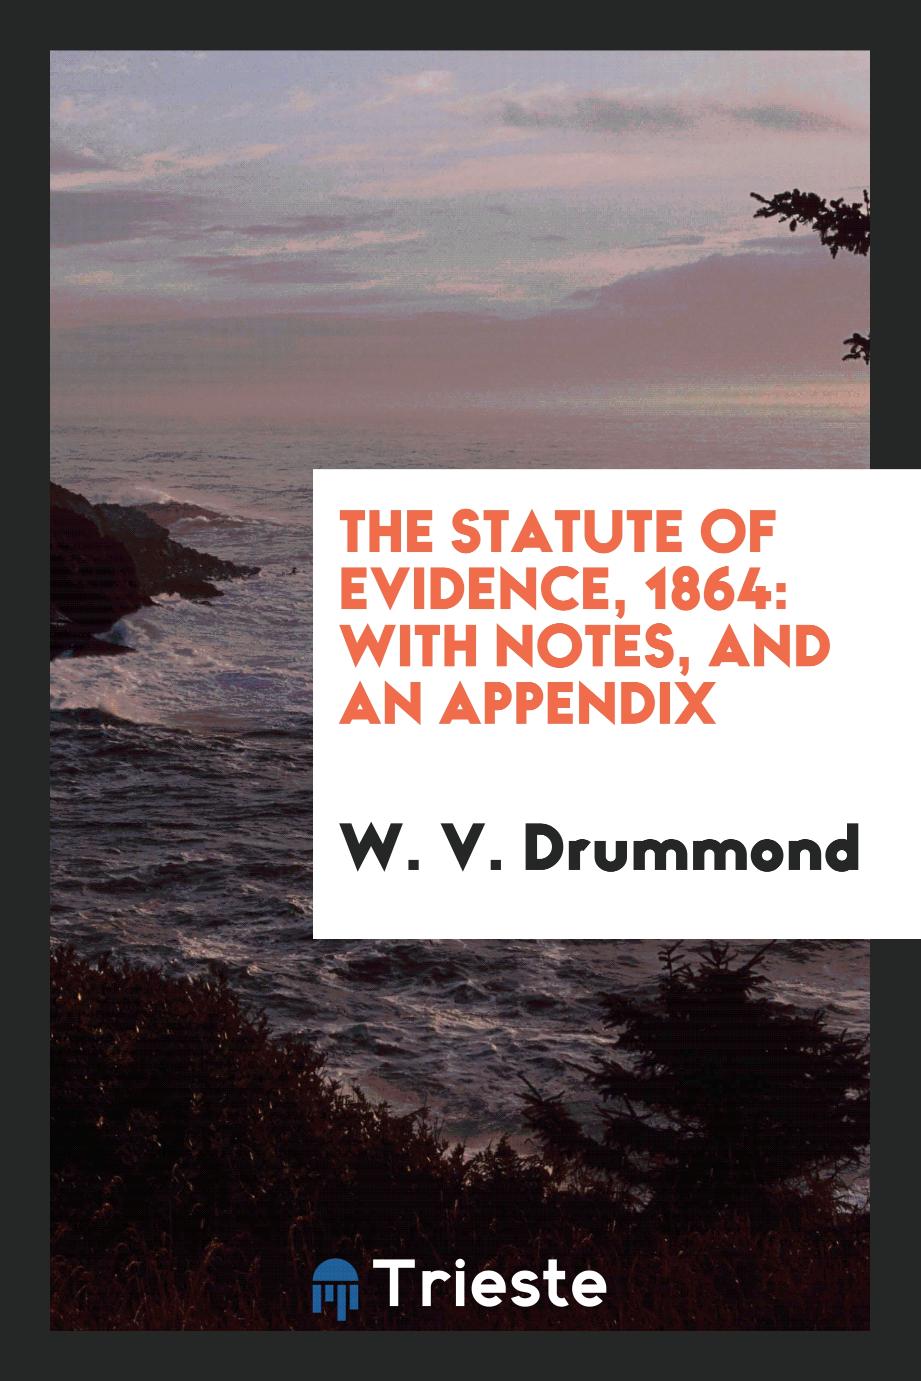 The Statute of Evidence, 1864: With Notes, and an Appendix